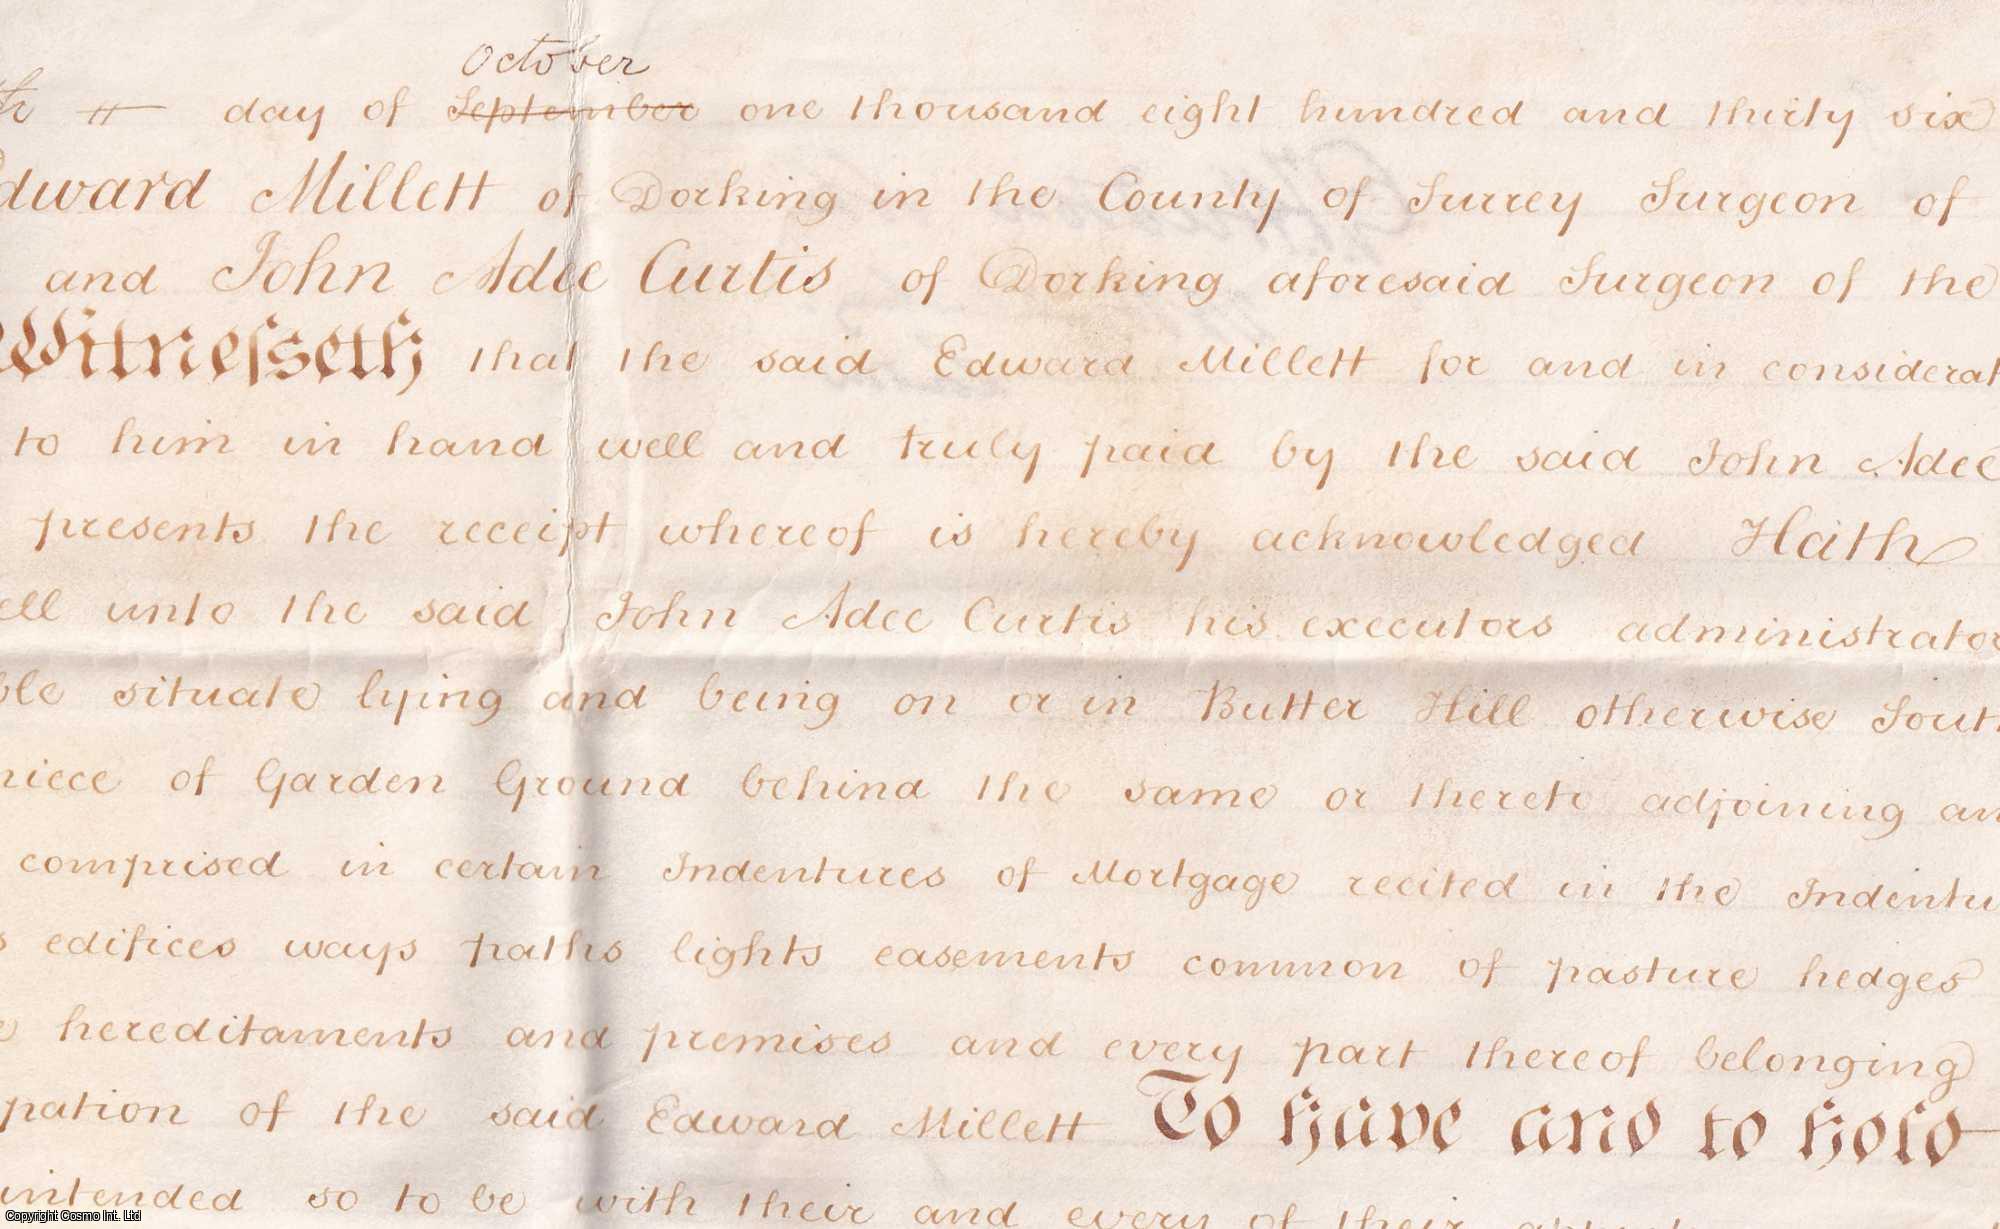 1836 Lease Dorking, Surrey - Lease for a year of property in Butter Hill, Dorking; from Edward Millett, Surgeon to John Adee Curtis, Surgeon in 1836. Single page (25.5 x 18 inches) parchment Indenture, handwritten, with signature, seal and stamp.